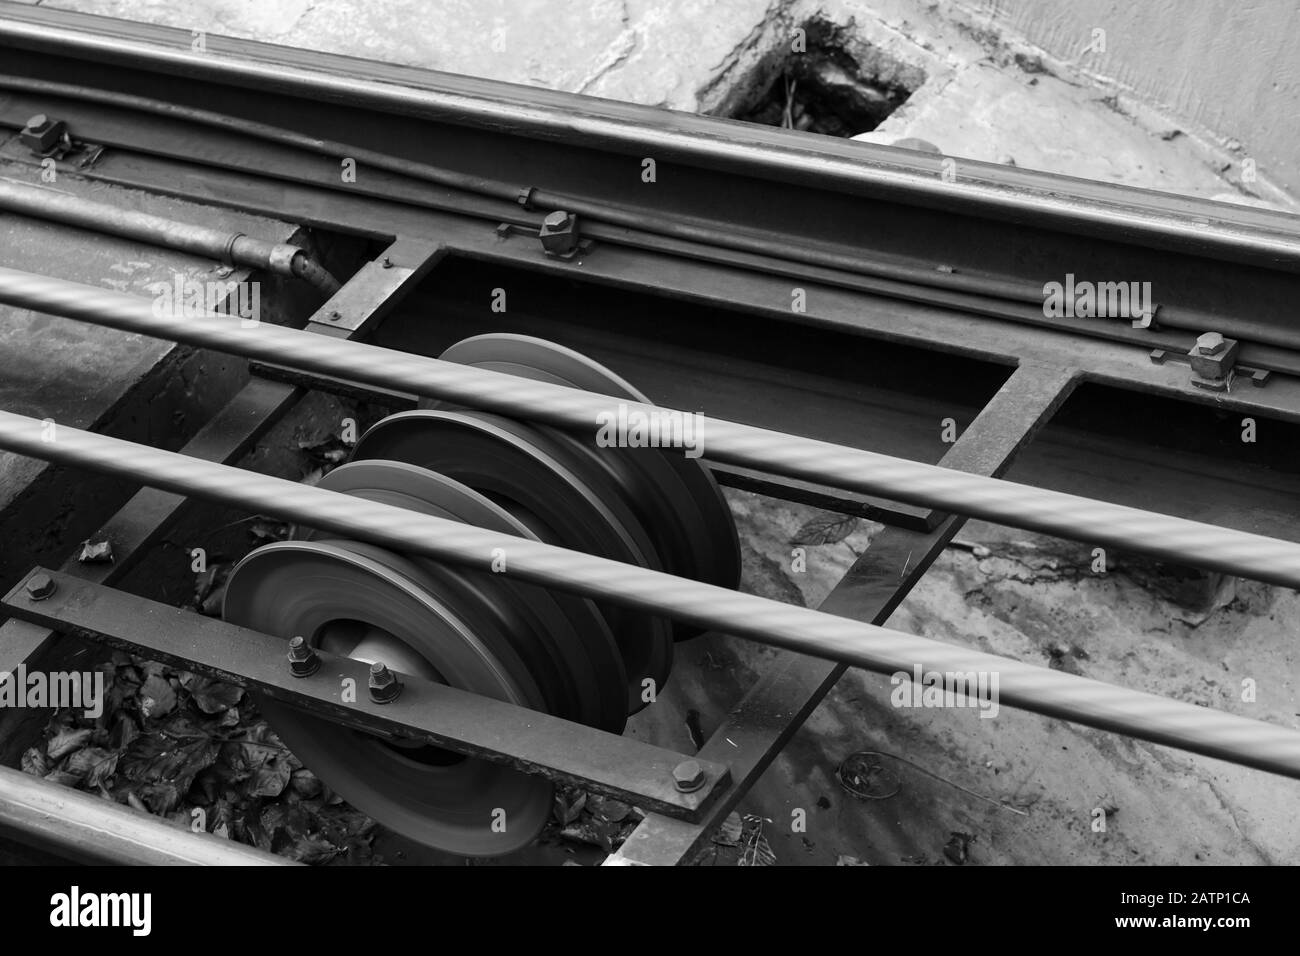 Funicular details. Rails, moving traction cable and support rollers. Black and white photo Stock Photo